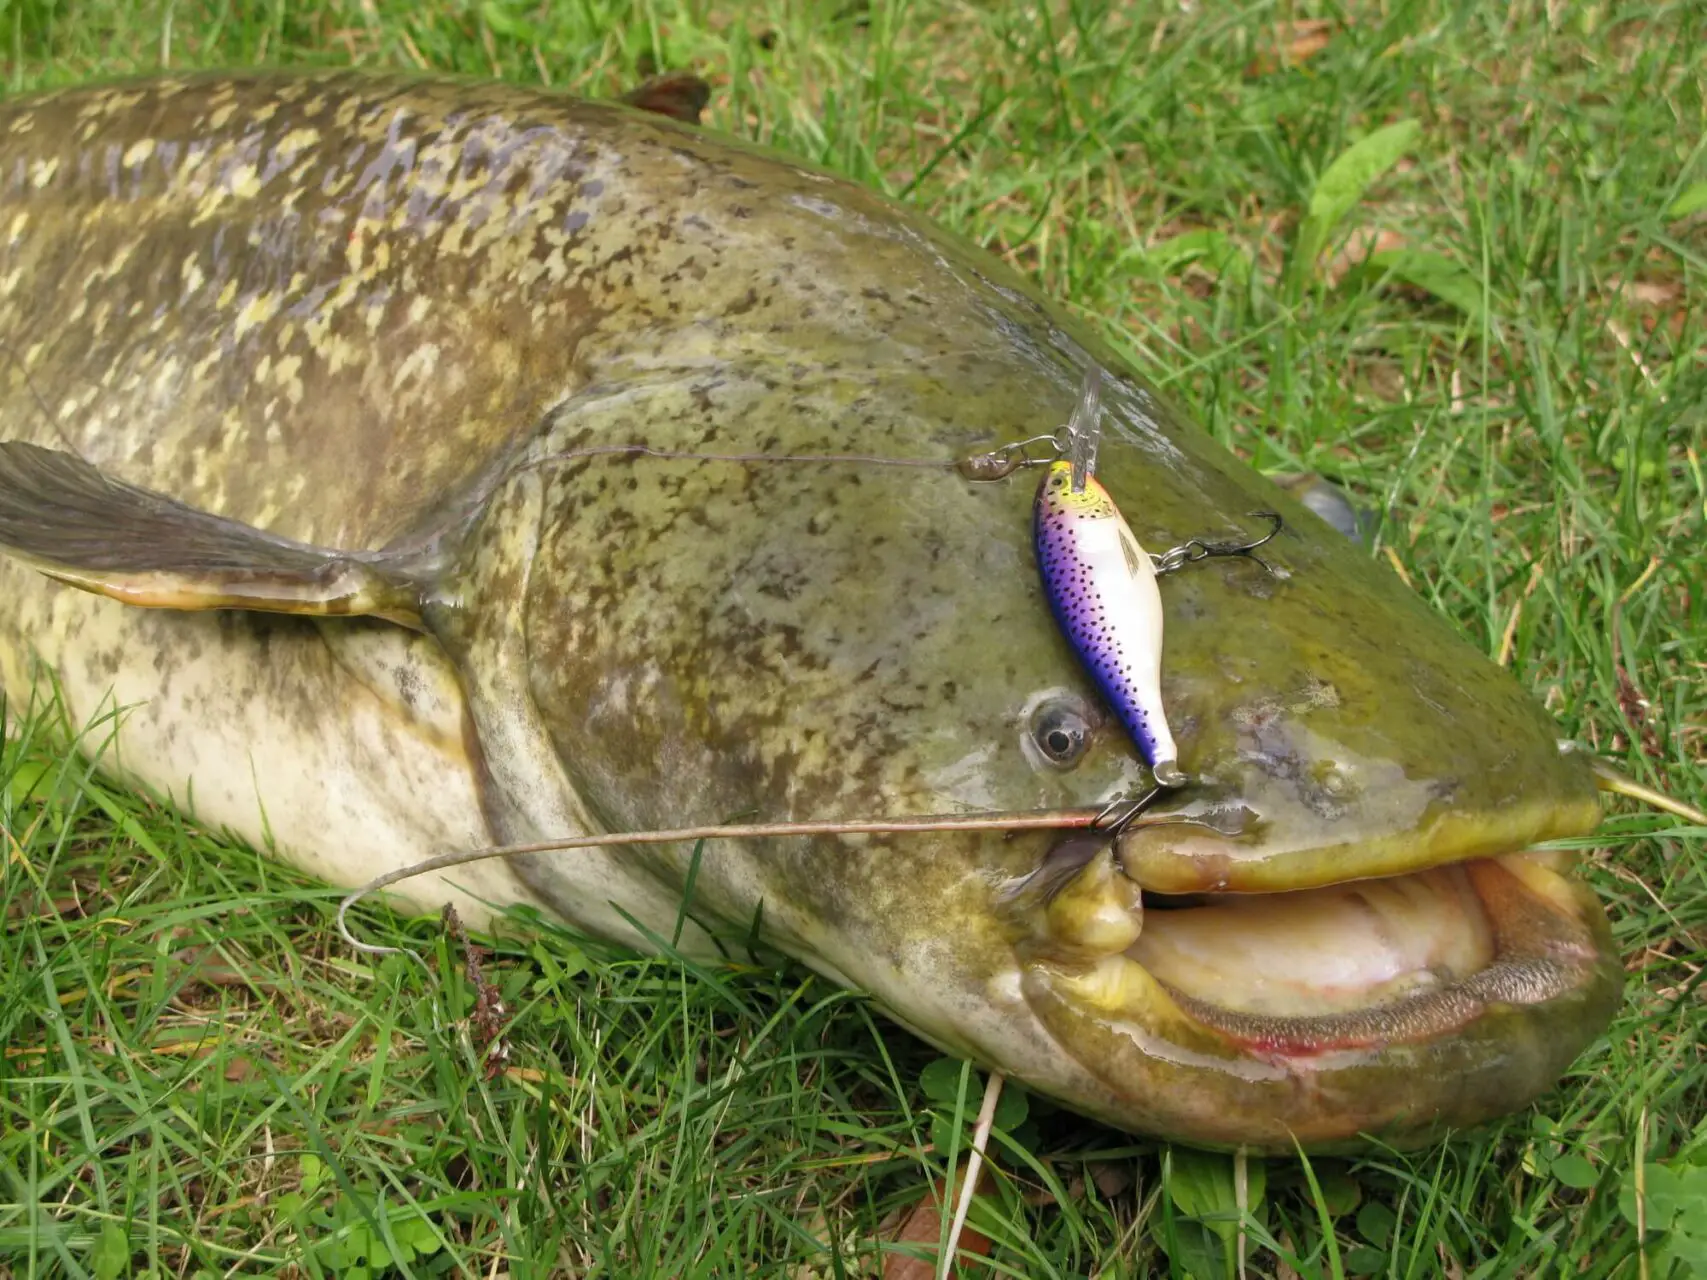 Are Catfish Good Eating? A catfish caught with a crankbait in the grass